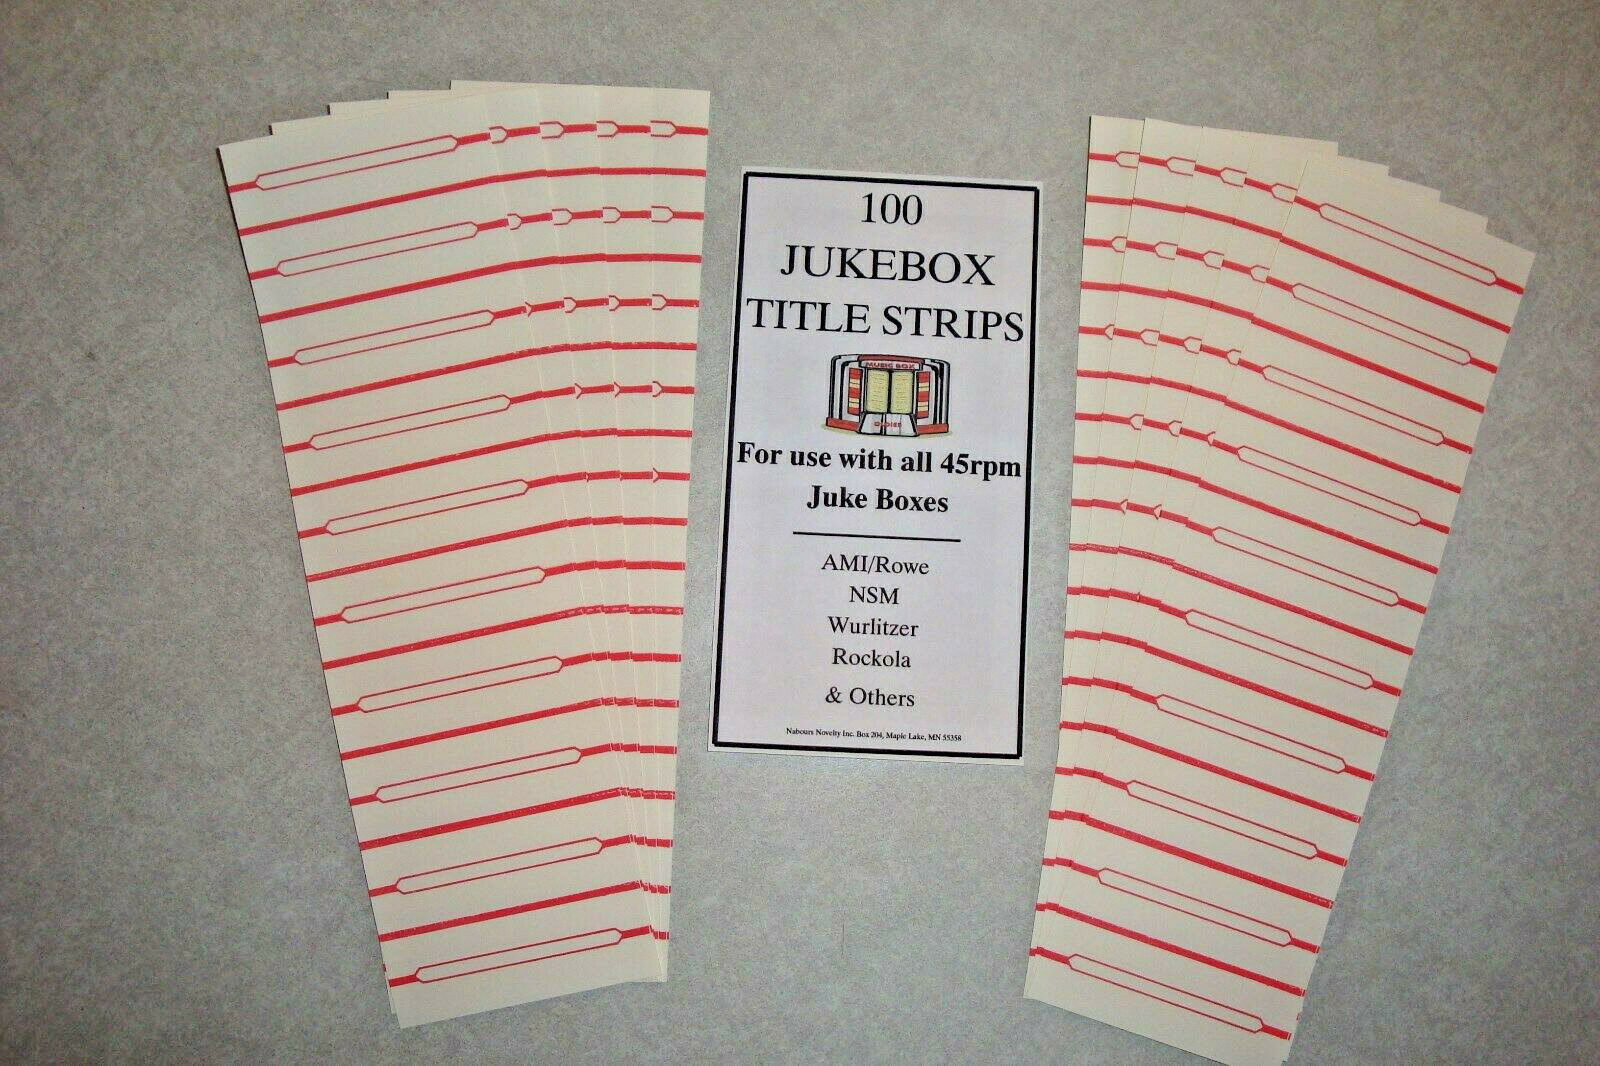 Jukebox Blank Title Strips, Jukebox Labels, 45rpm, 100 Strips, From The Usa!